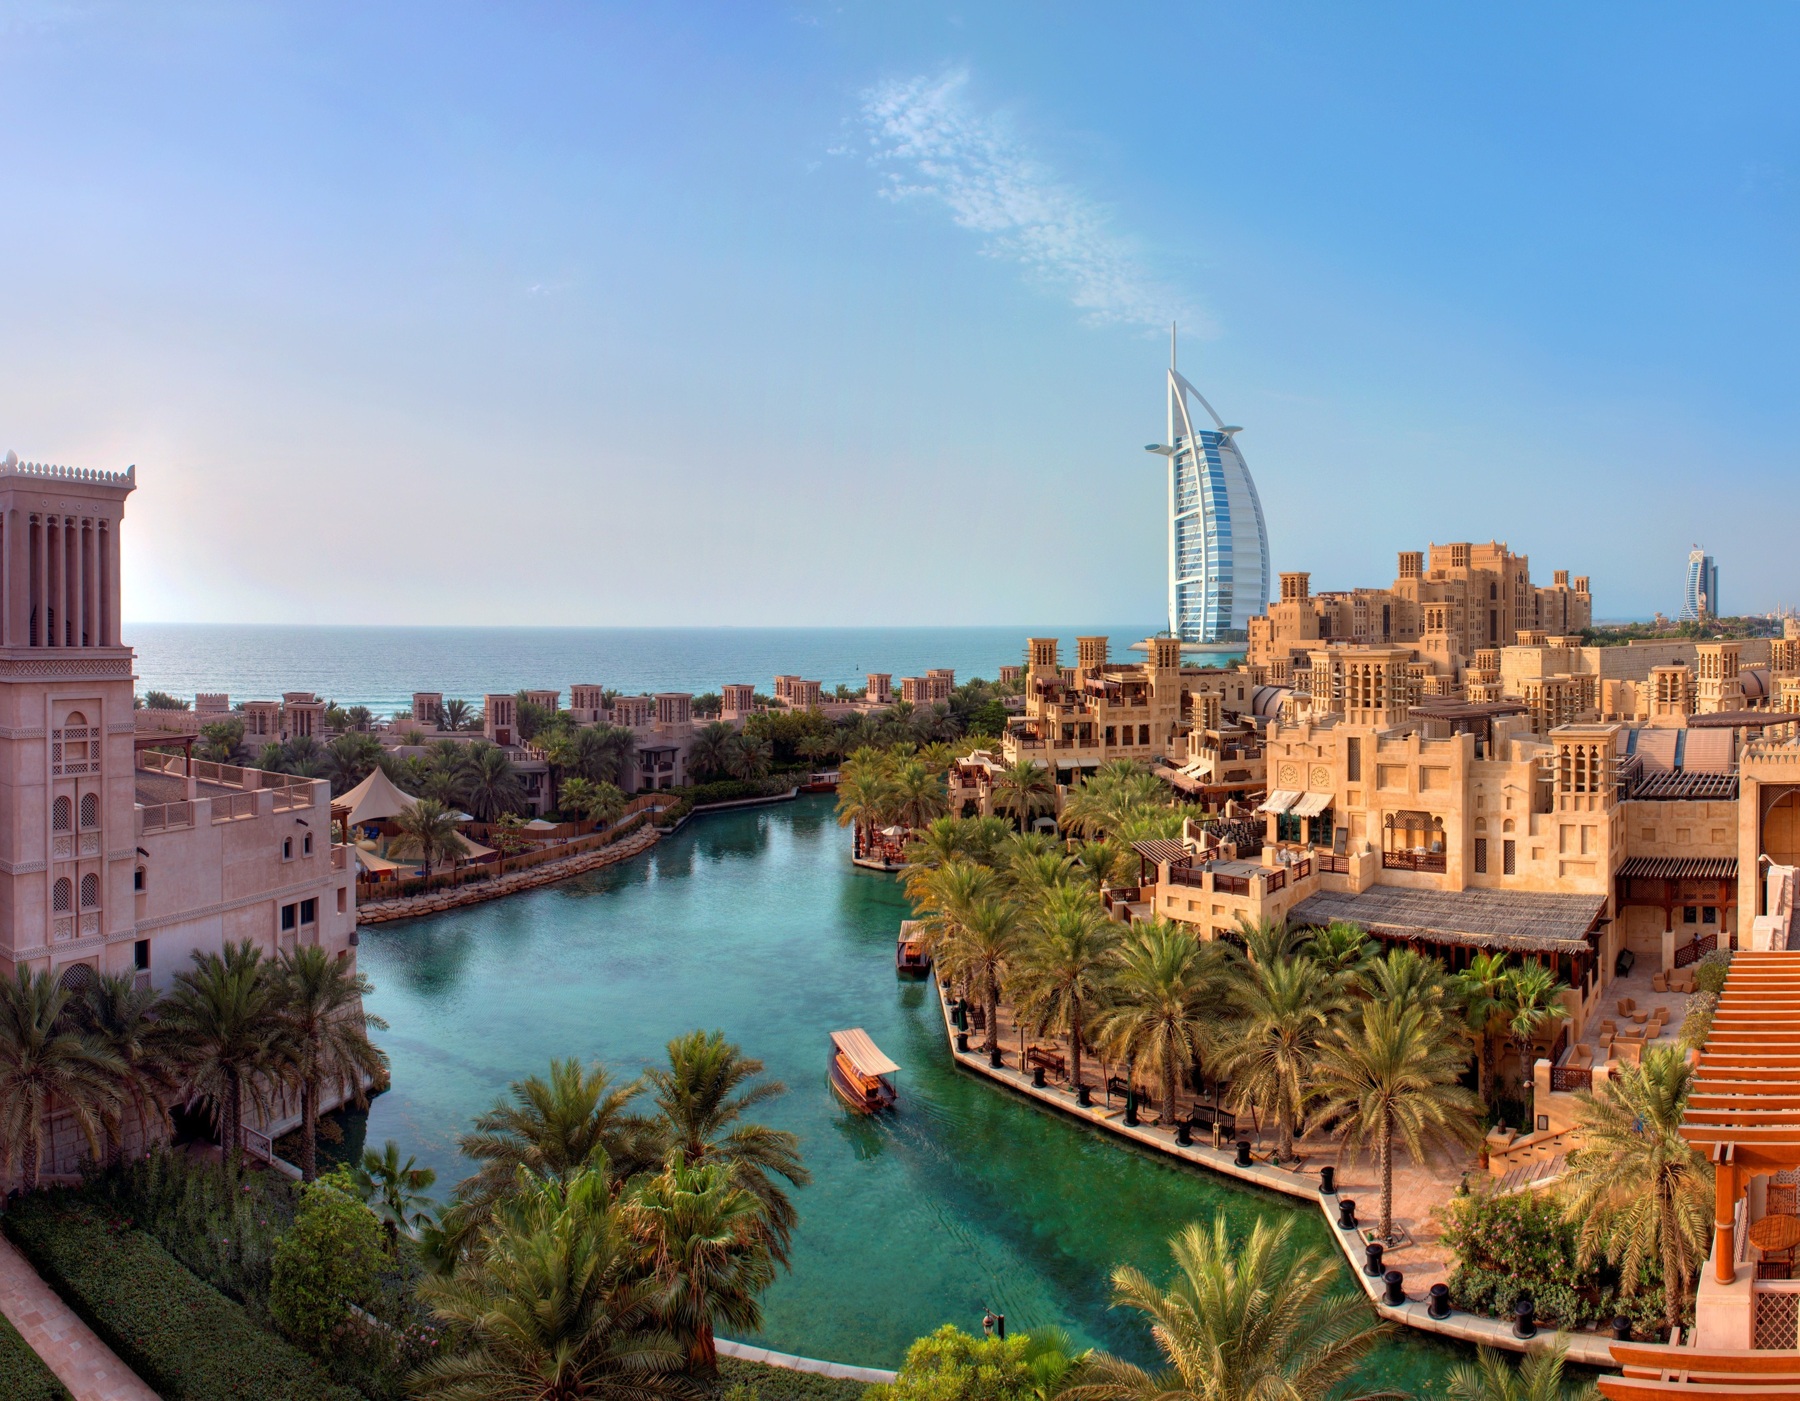 The Madinat Jumeirah in Dubai, with the Burj Al Arab in the distance